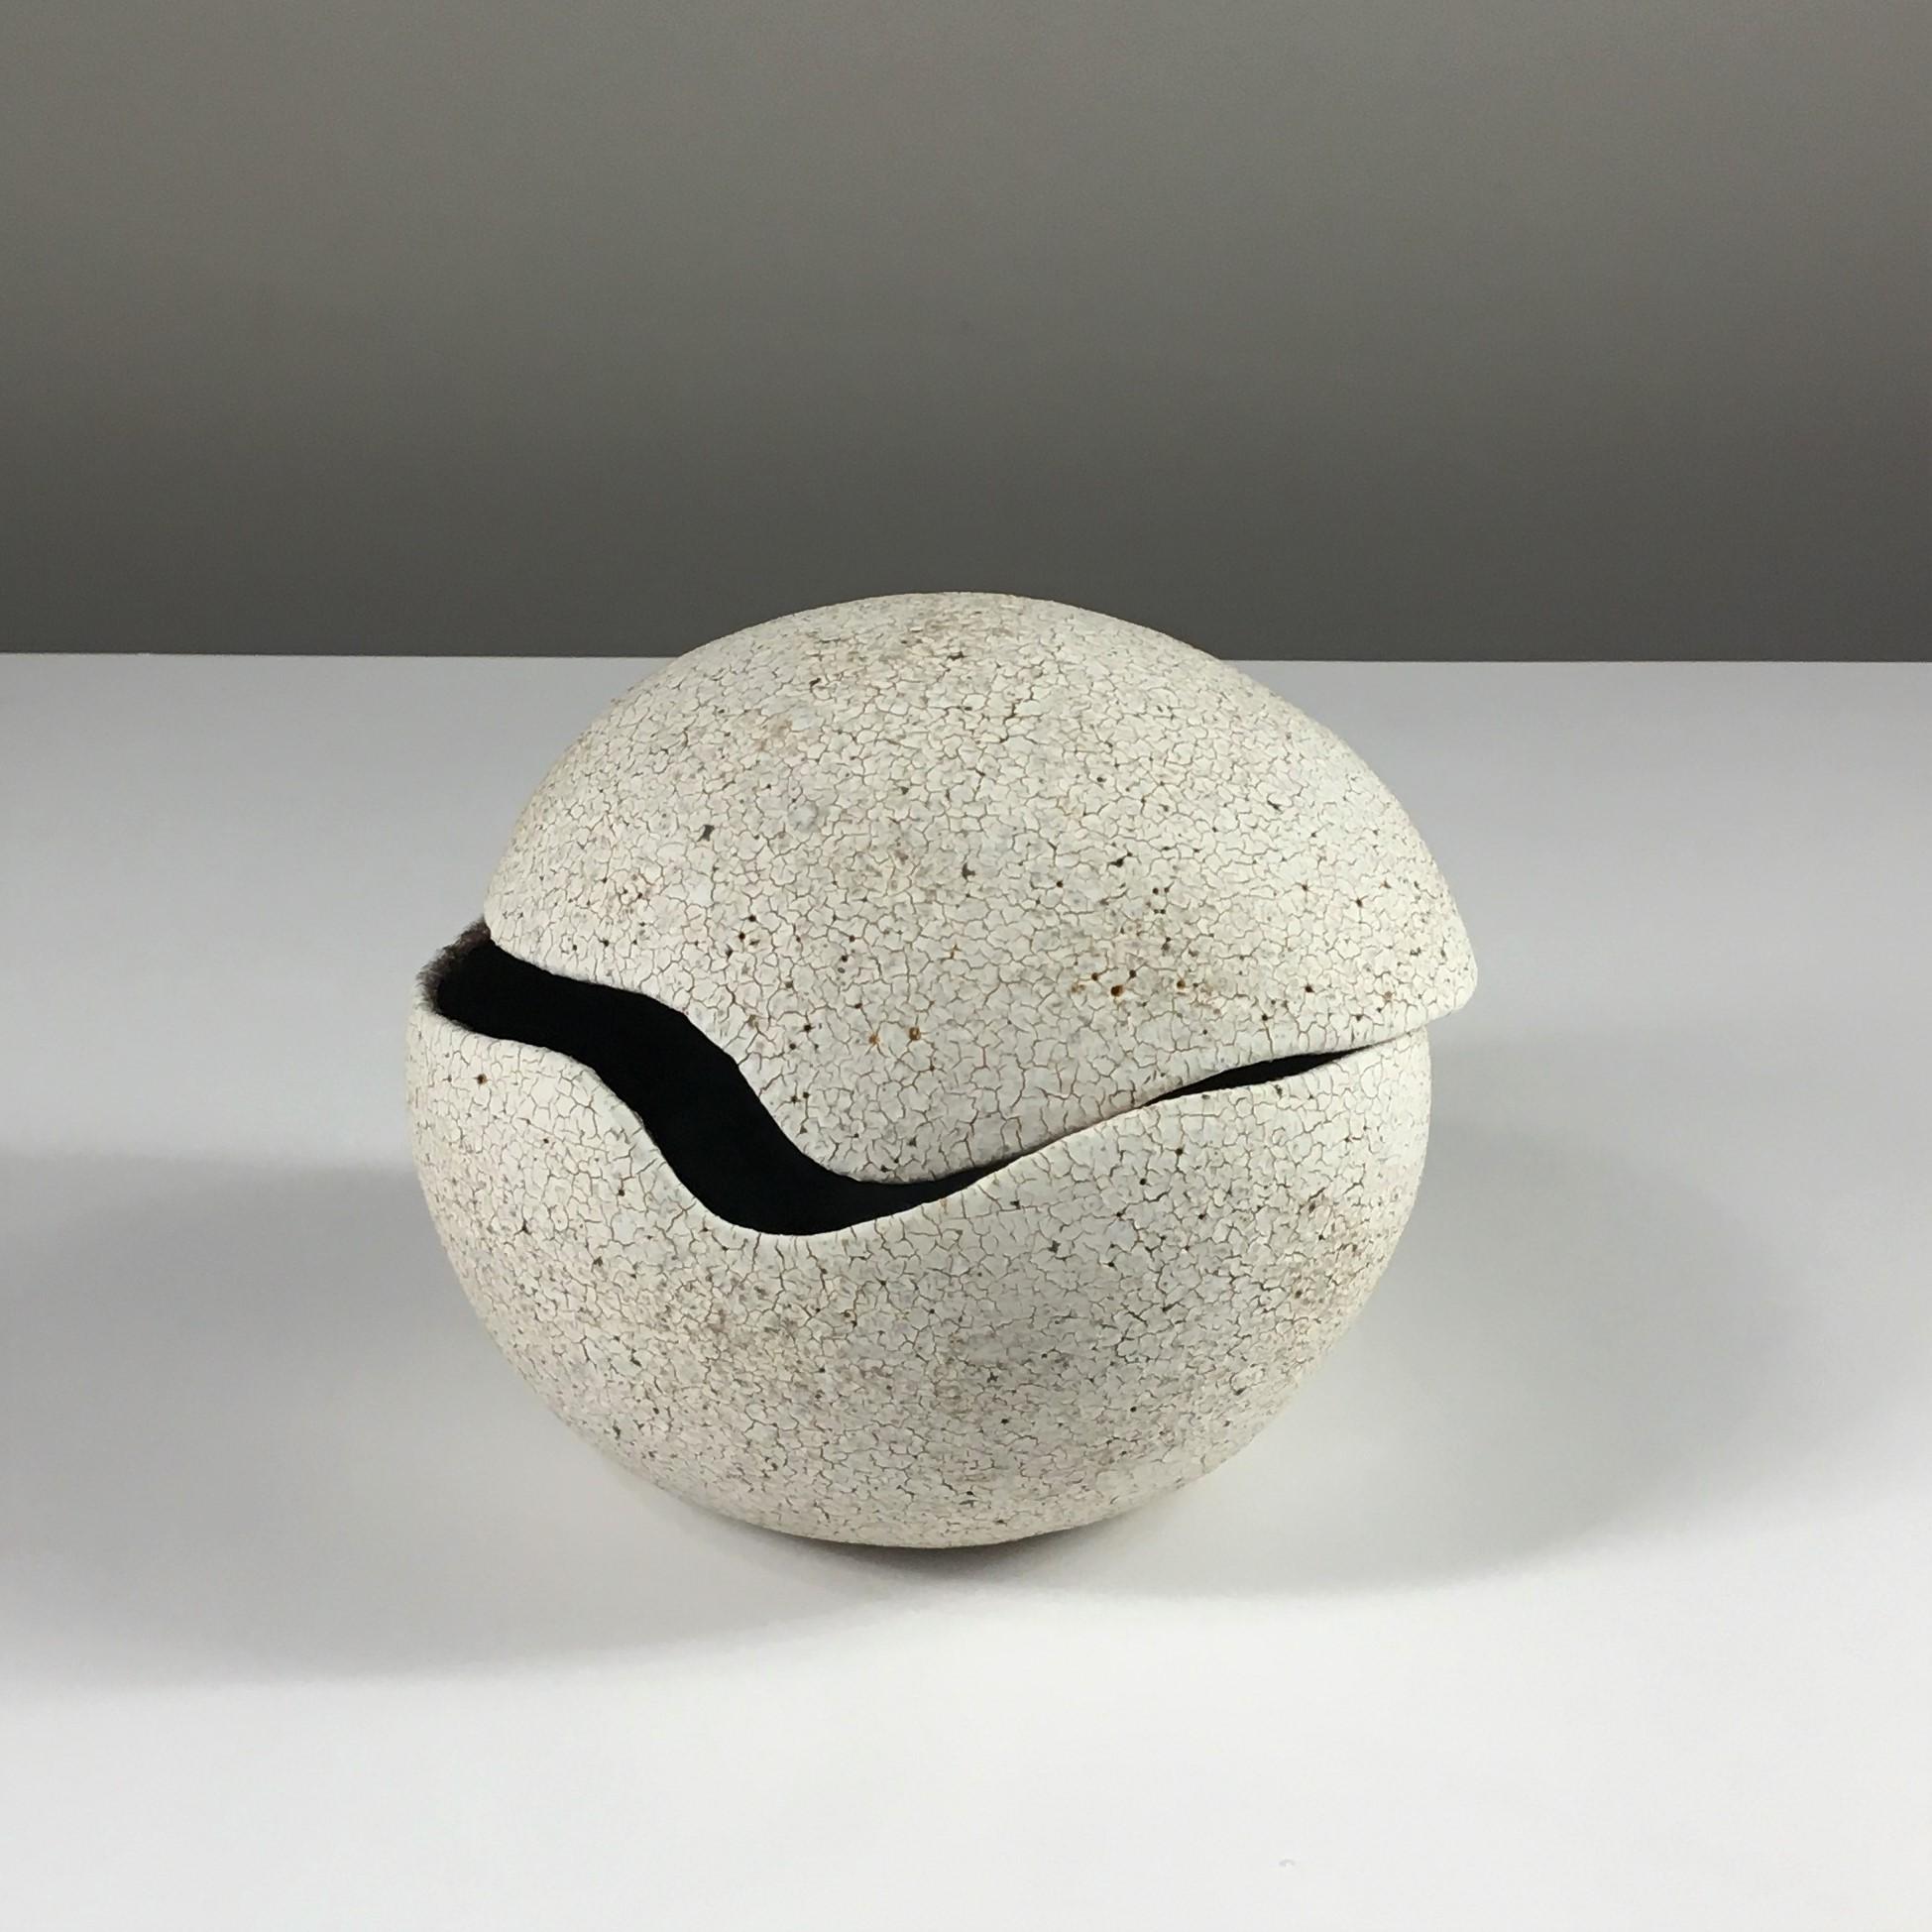 Organic Modern Orb Covered Vessel Pottery by Yumiko Kuga